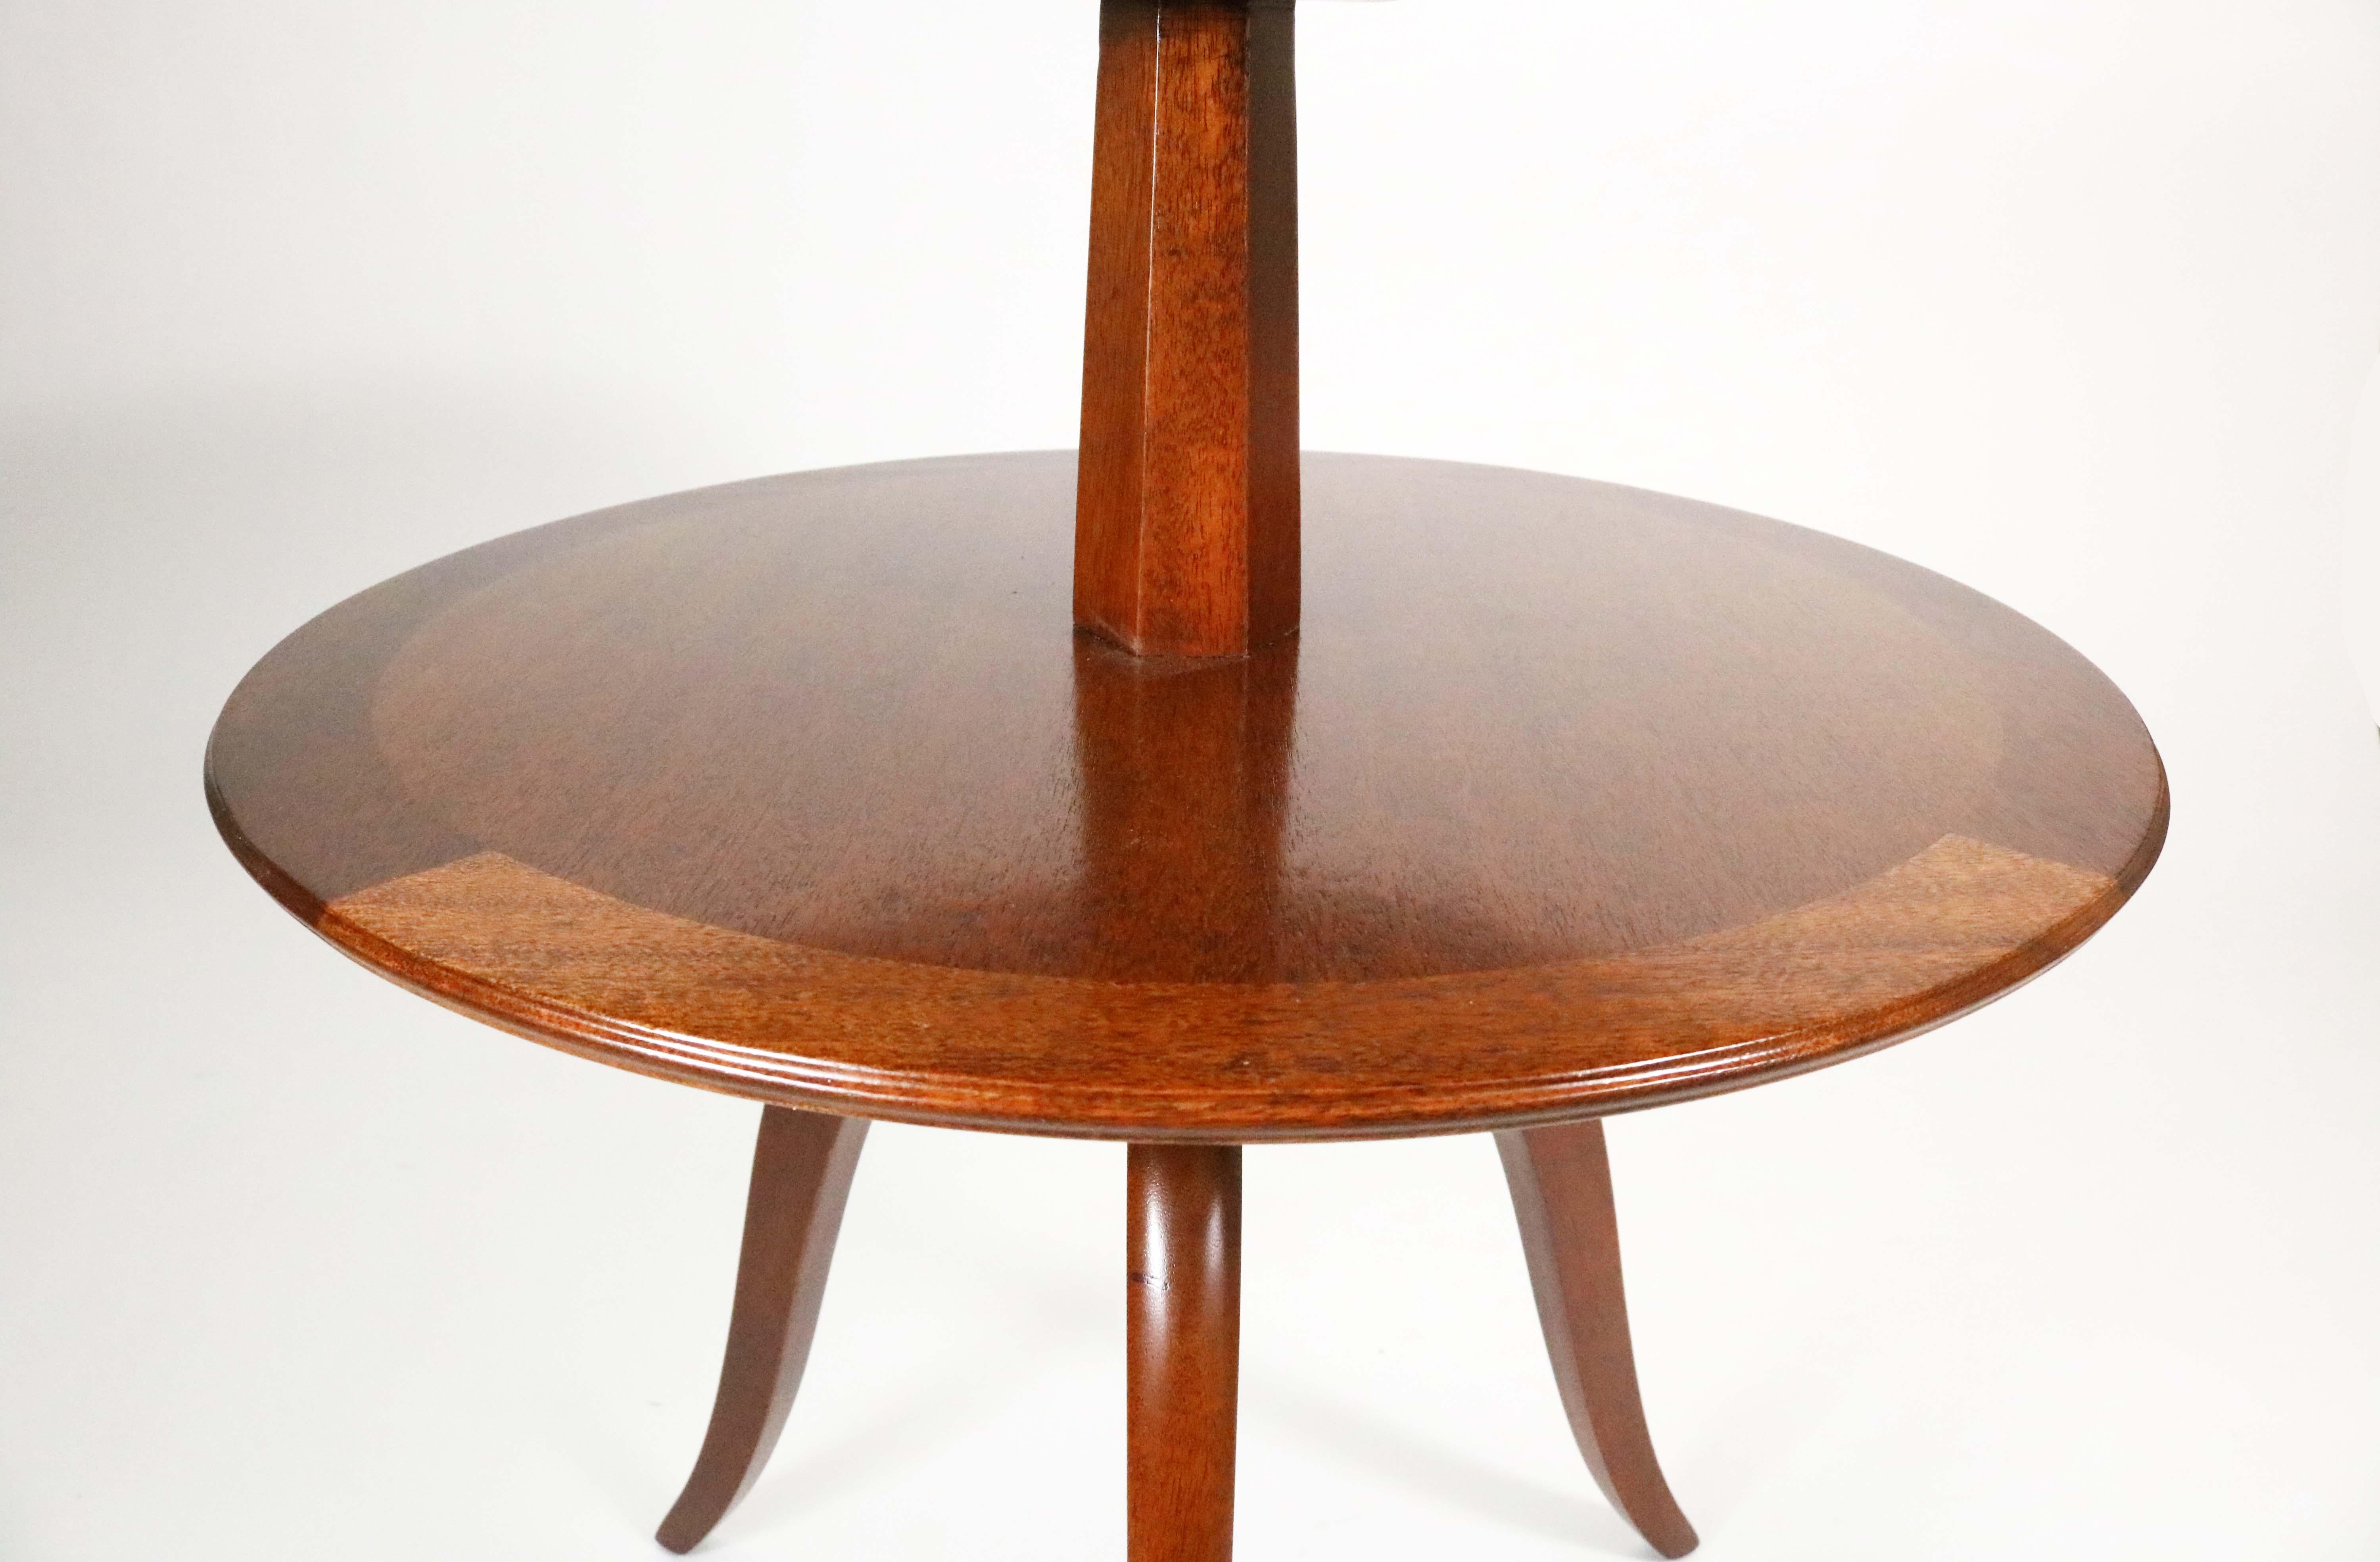 Two-Tier Mahogany Side Table by Edward Wormley for Dunbar 1